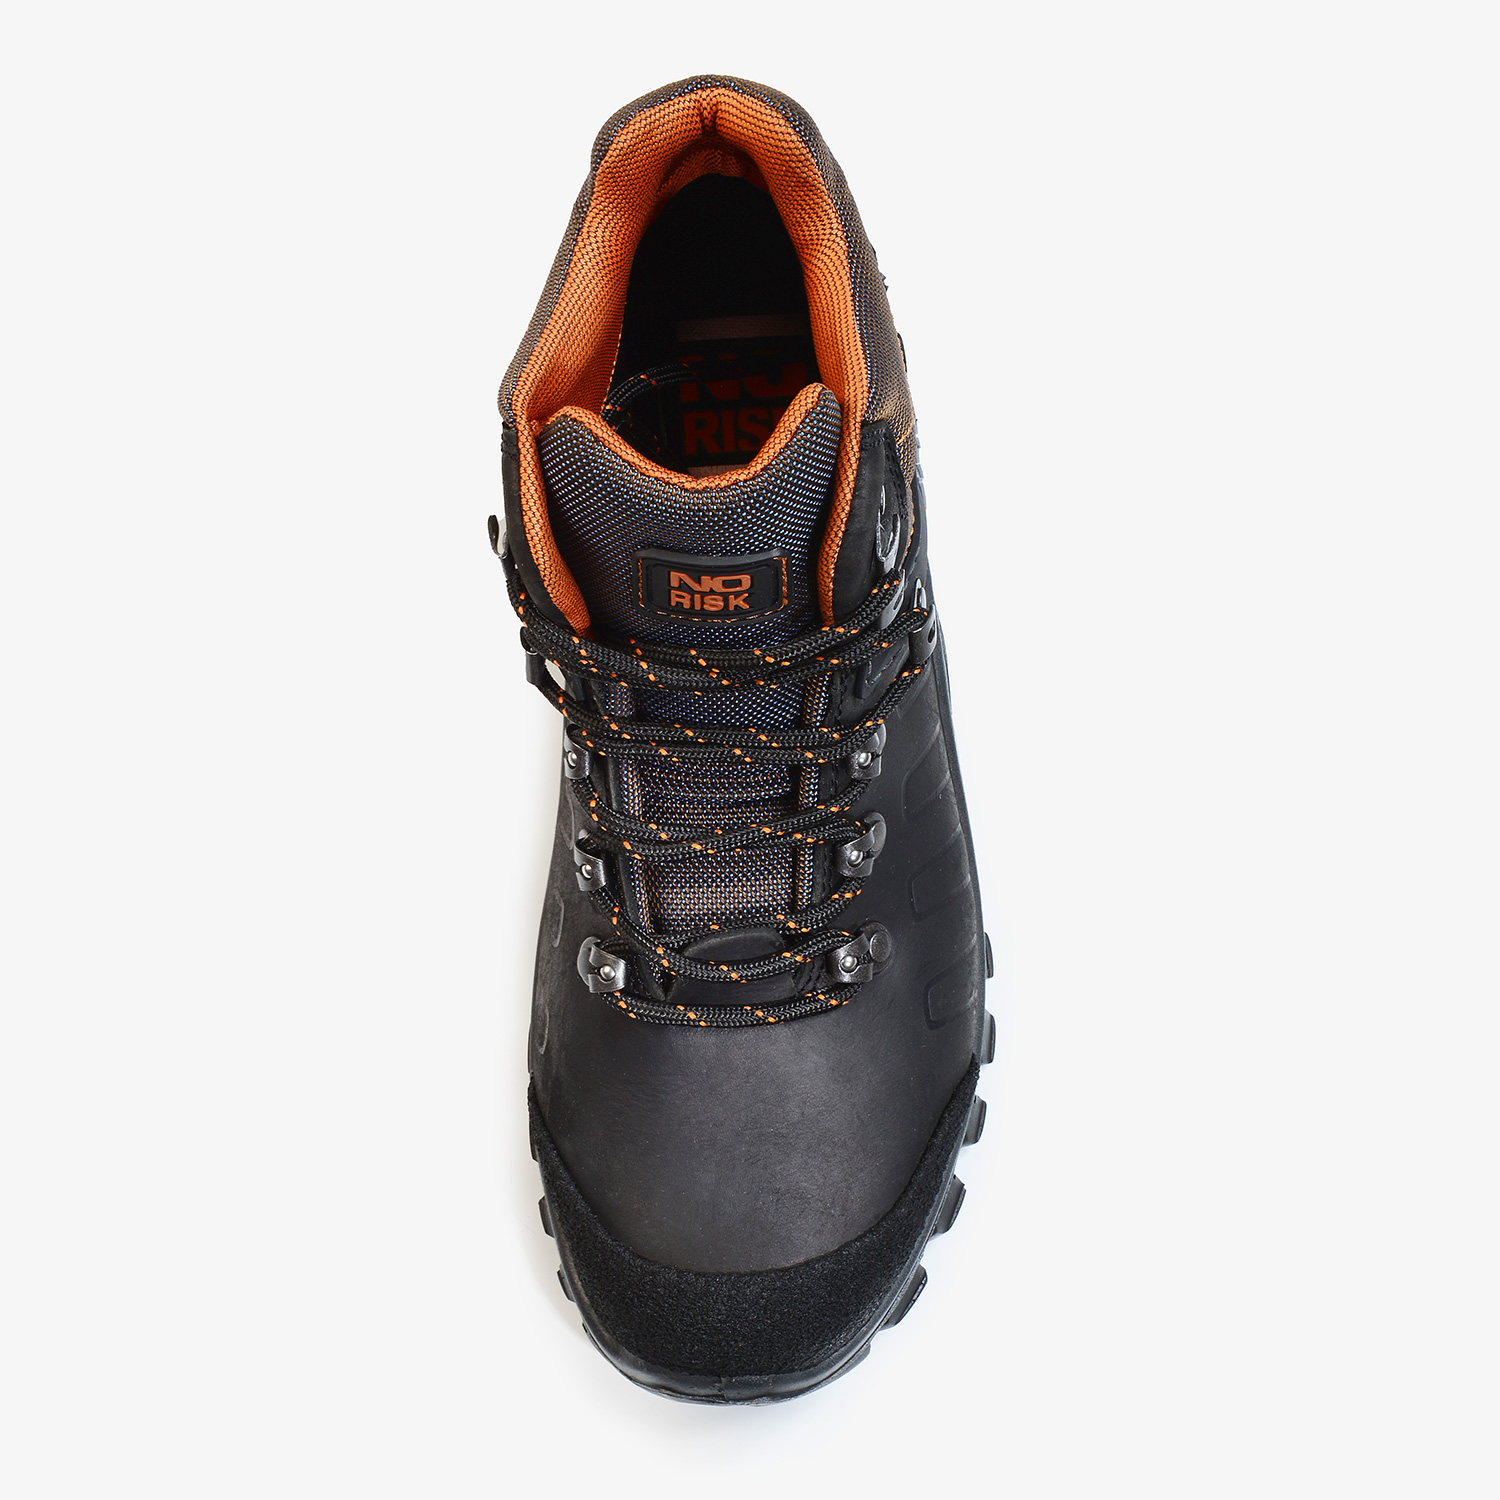 SUBWAY safety boots S3 SRC steel toe cap